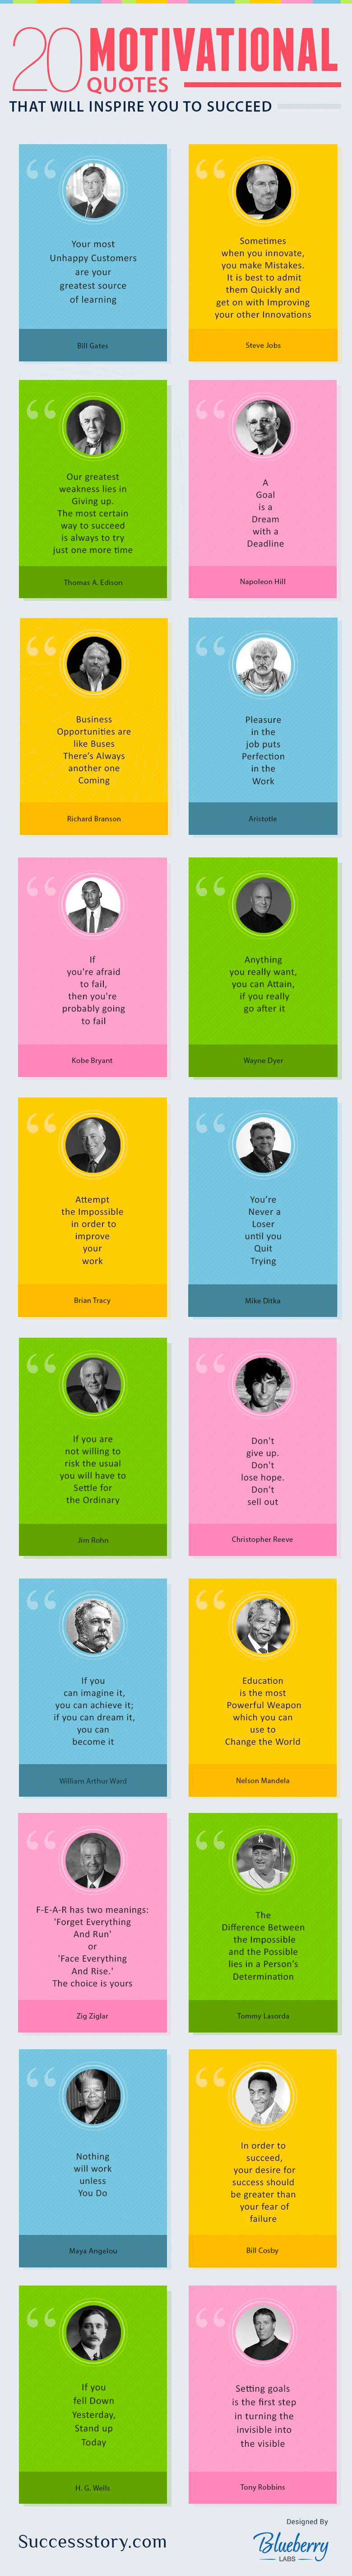 famous quotes by famous people about success